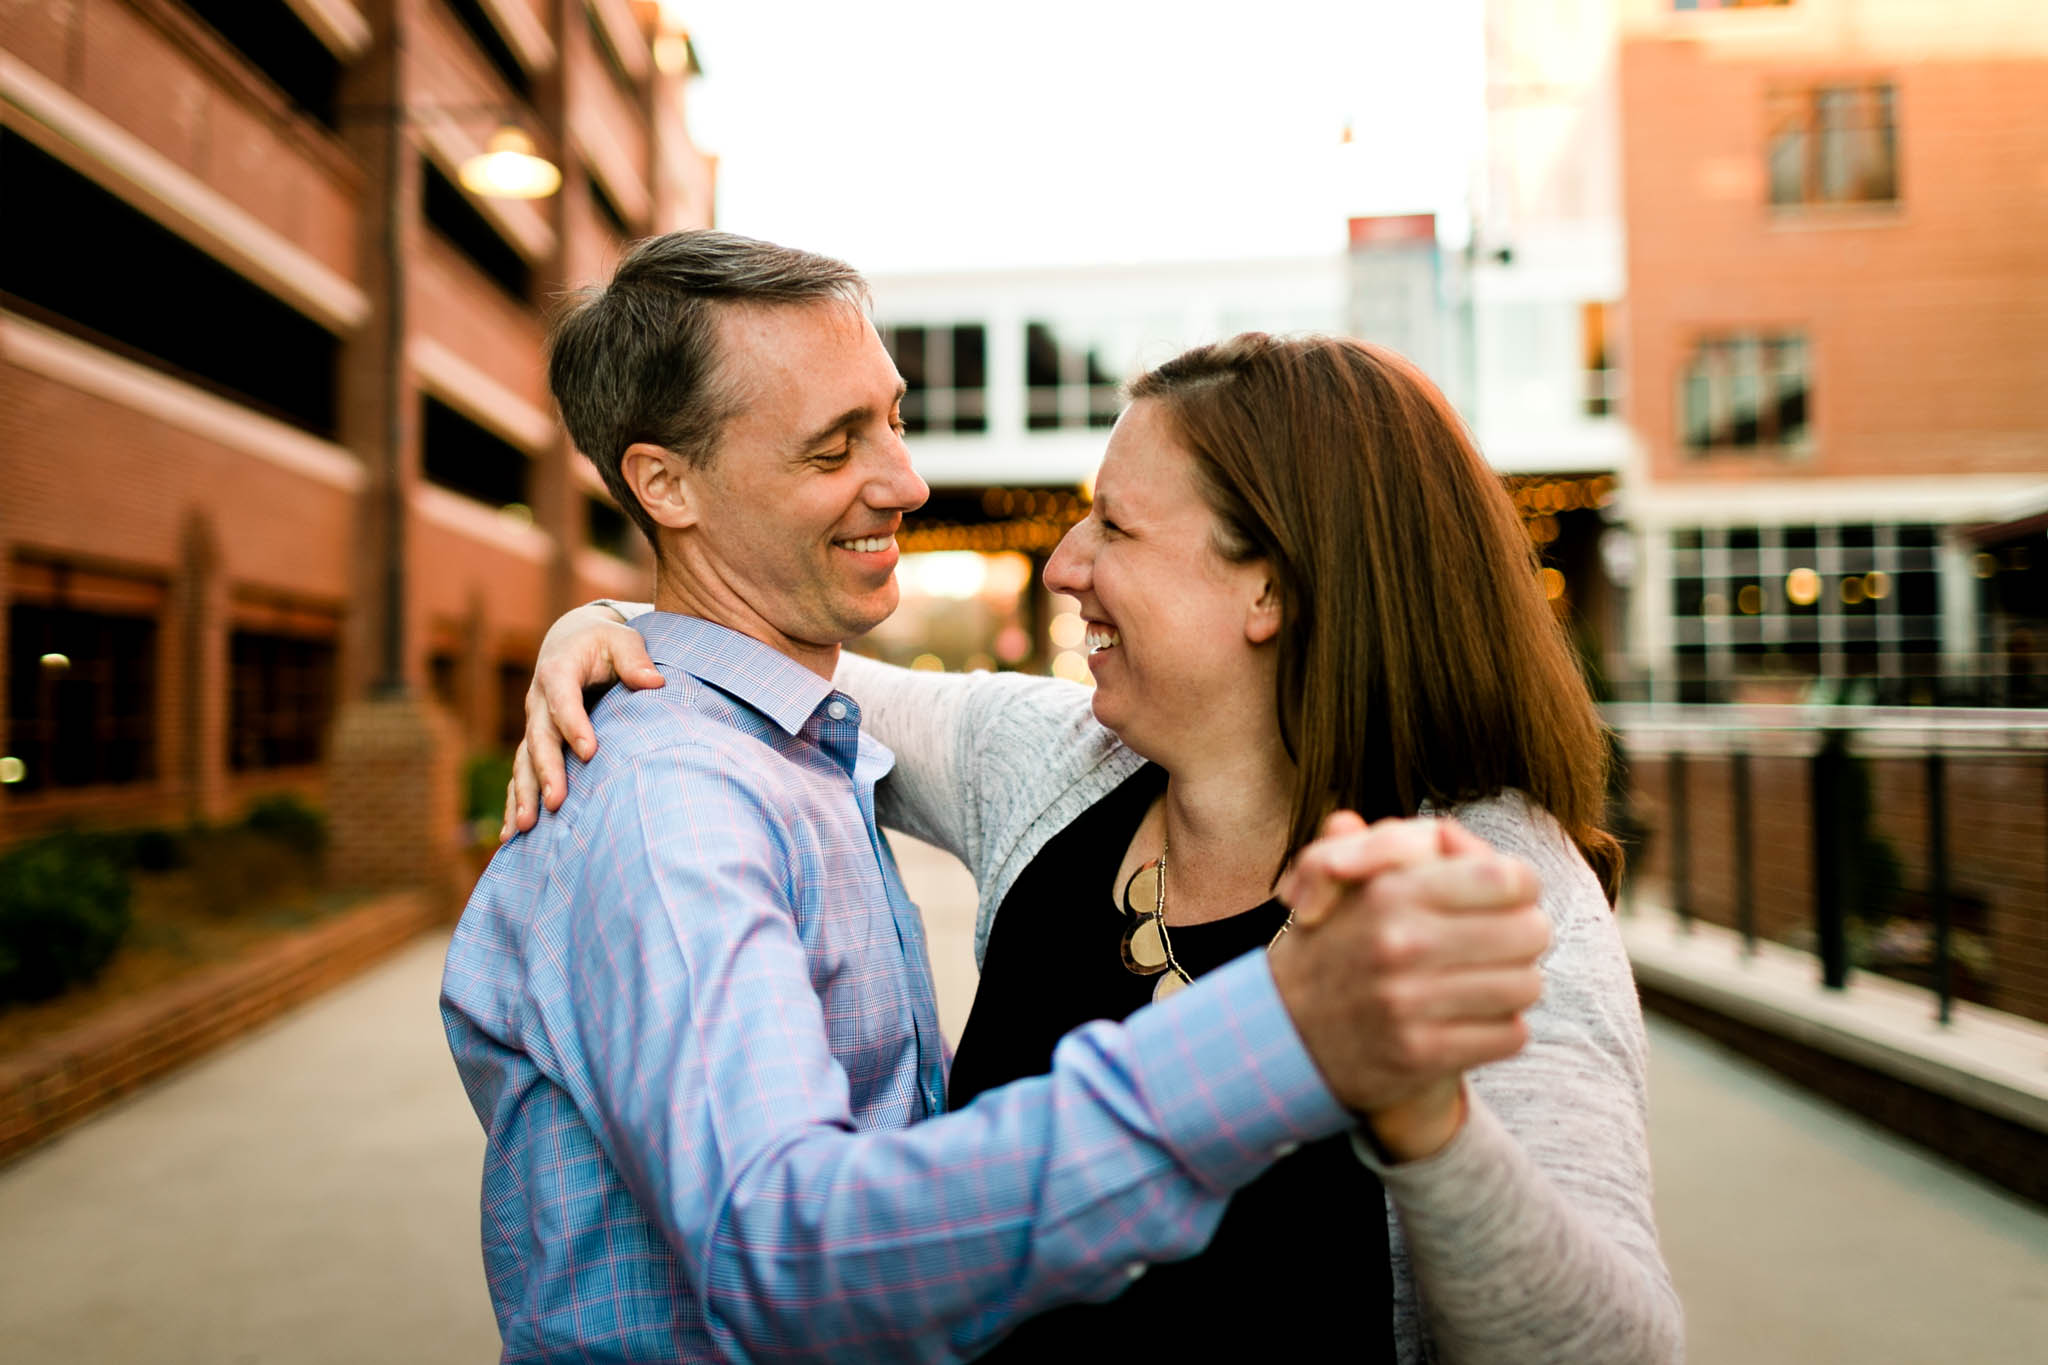 Durham Photographer | Couple laughing and dancing at American Tobacco Campus | By G. Lin Photography